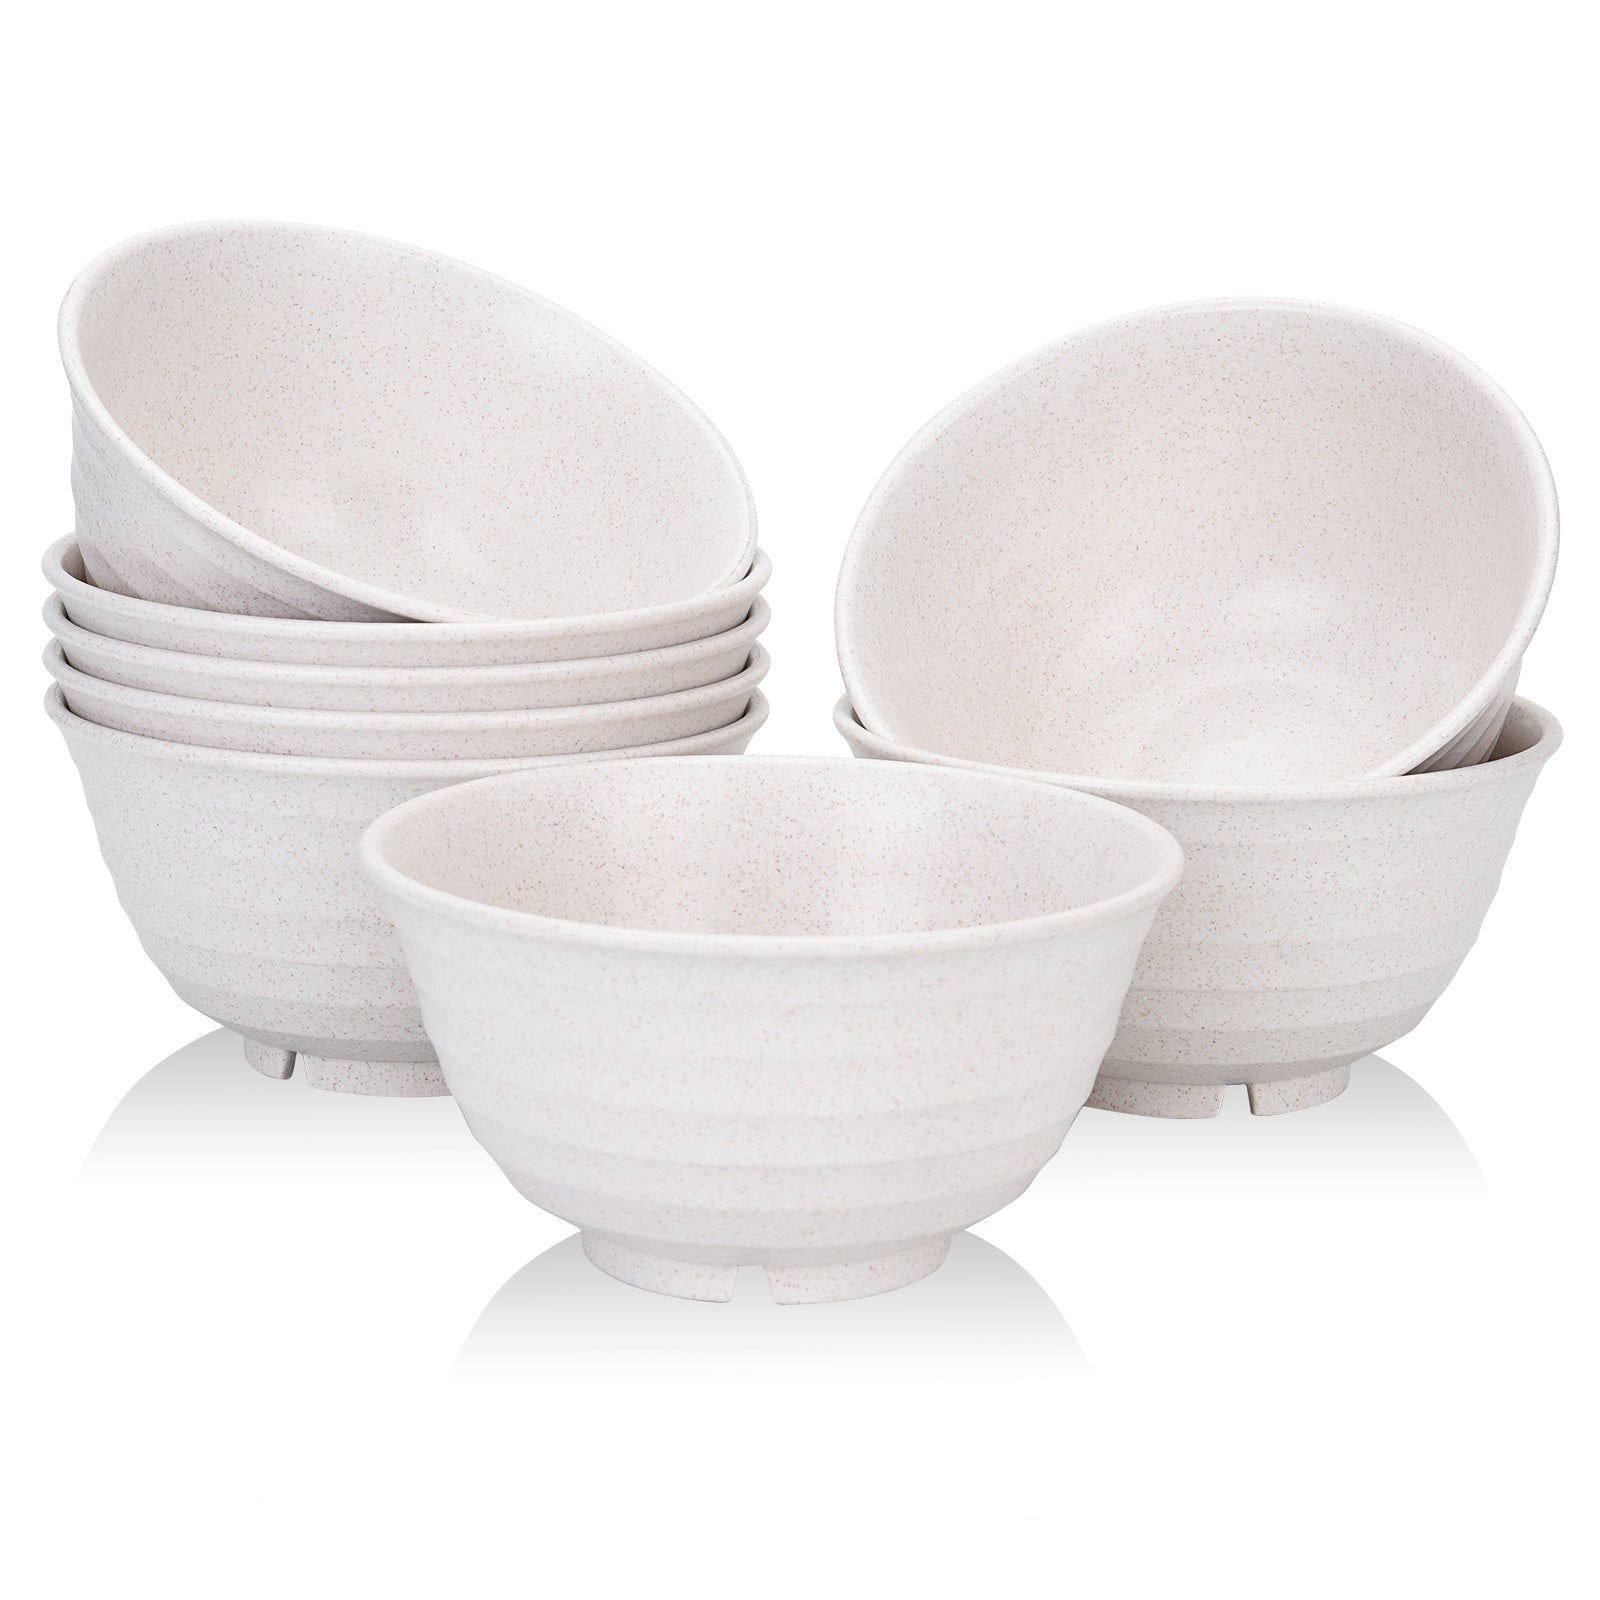 US$ 21.99 - Cereal Bowls 8 Pieces, Reusable Light Weight Bowl For